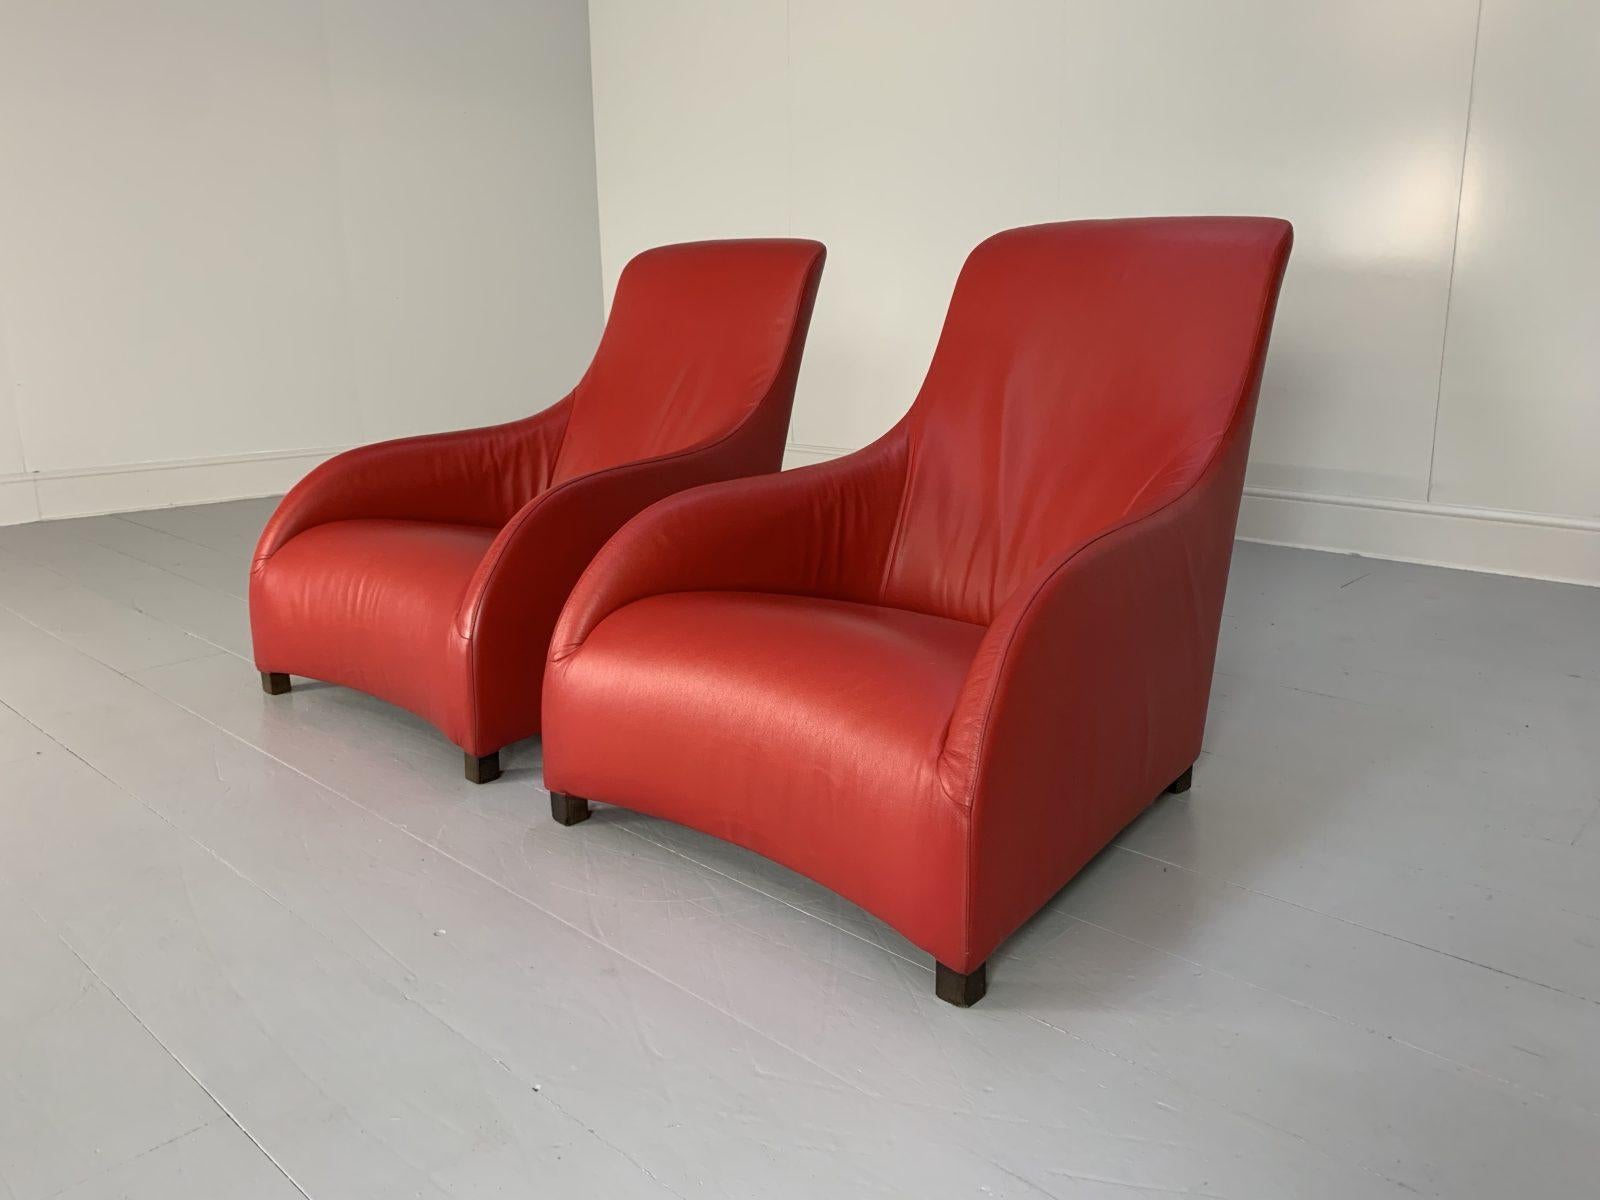 Hello Friends, and welcome to another unmissable offering from Lord Browns Furniture, the UK’s premier resource for fine Sofas and Chairs.

On offer on this occasion is a rare, impeccable identical pair of Maxalto “Kalos 9750_N” Armchairs from the